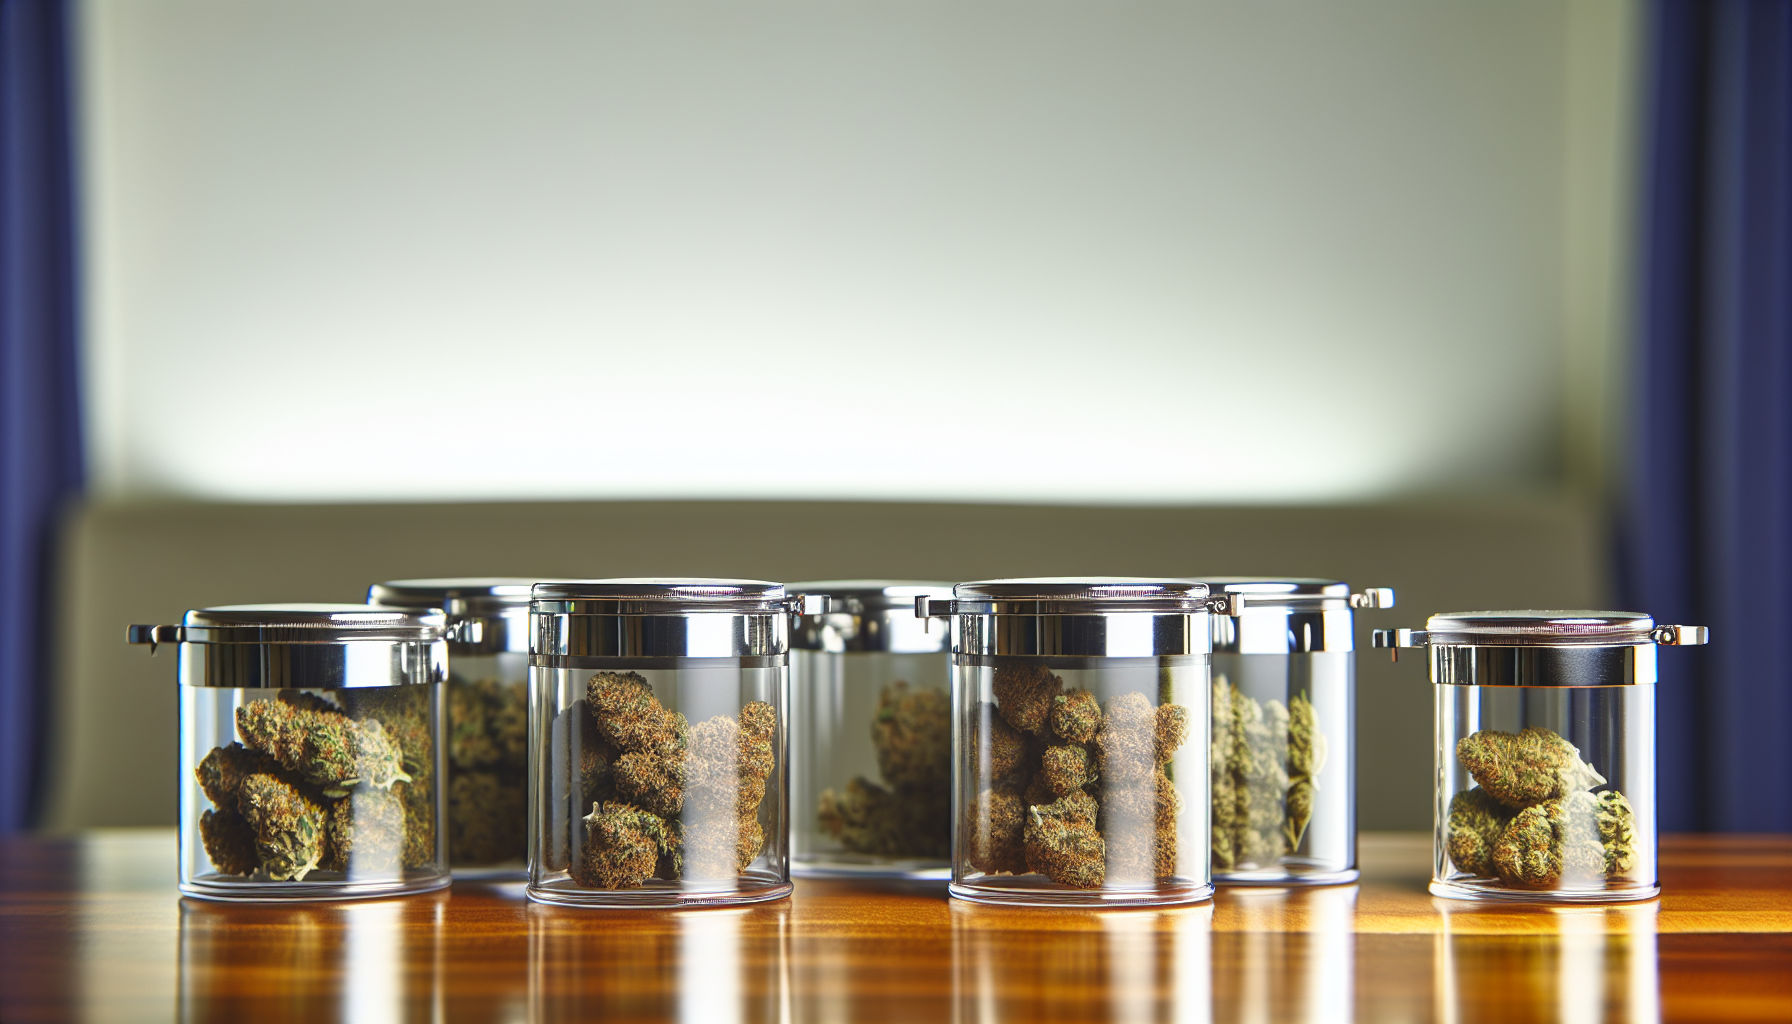 Storing weed in airtight jars to contain cannabis scent